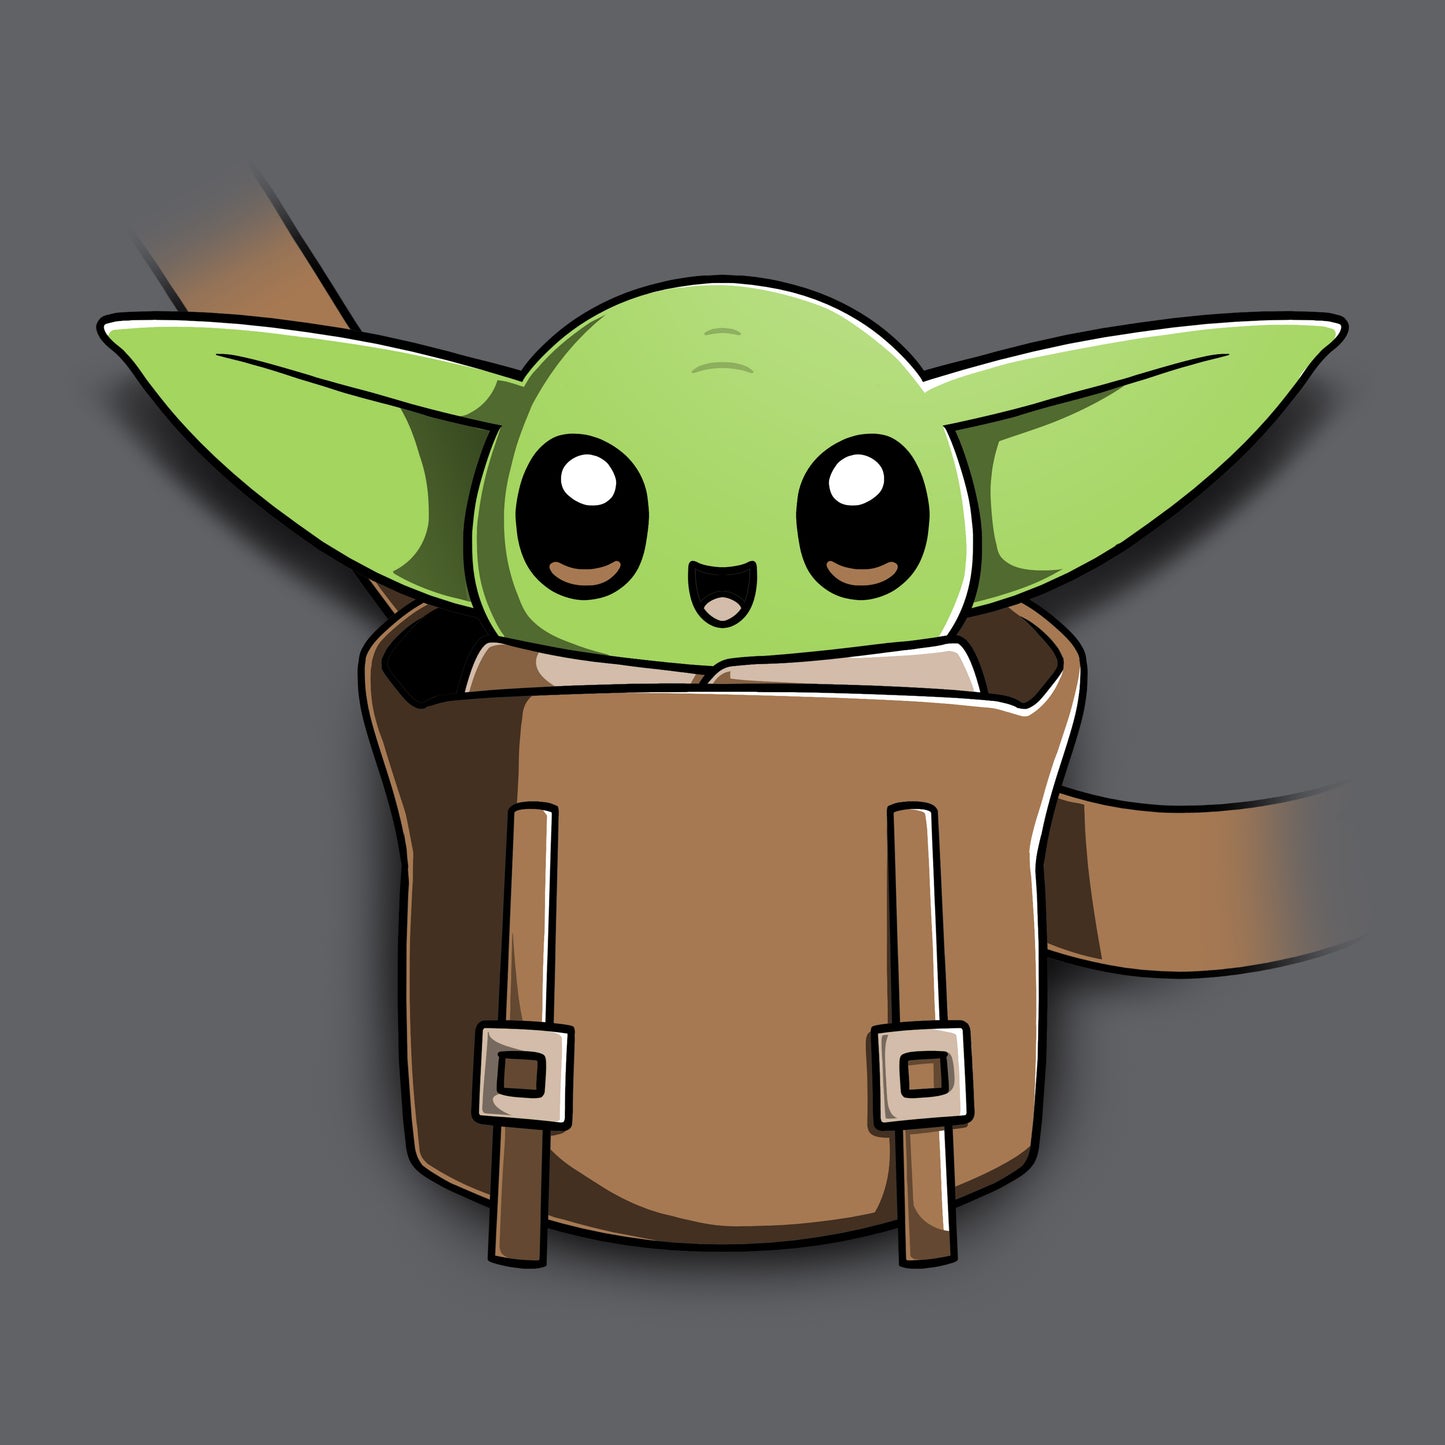 The officially licensed Star Wars Grogu is sitting in a backpack.